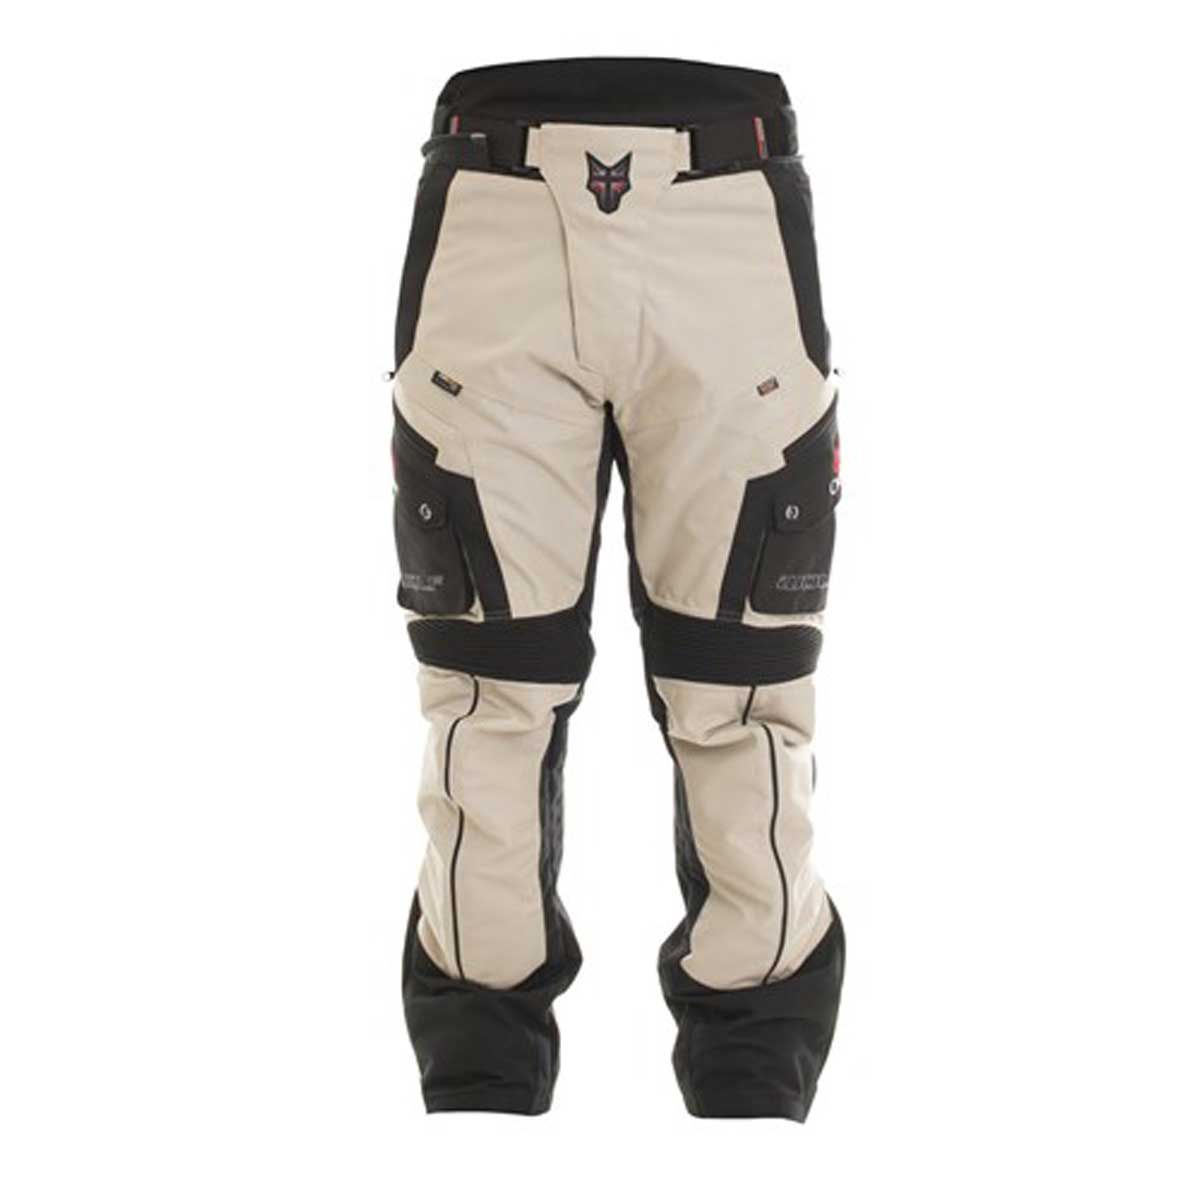 Motorcycle Trousers - Motorcycle Clothing